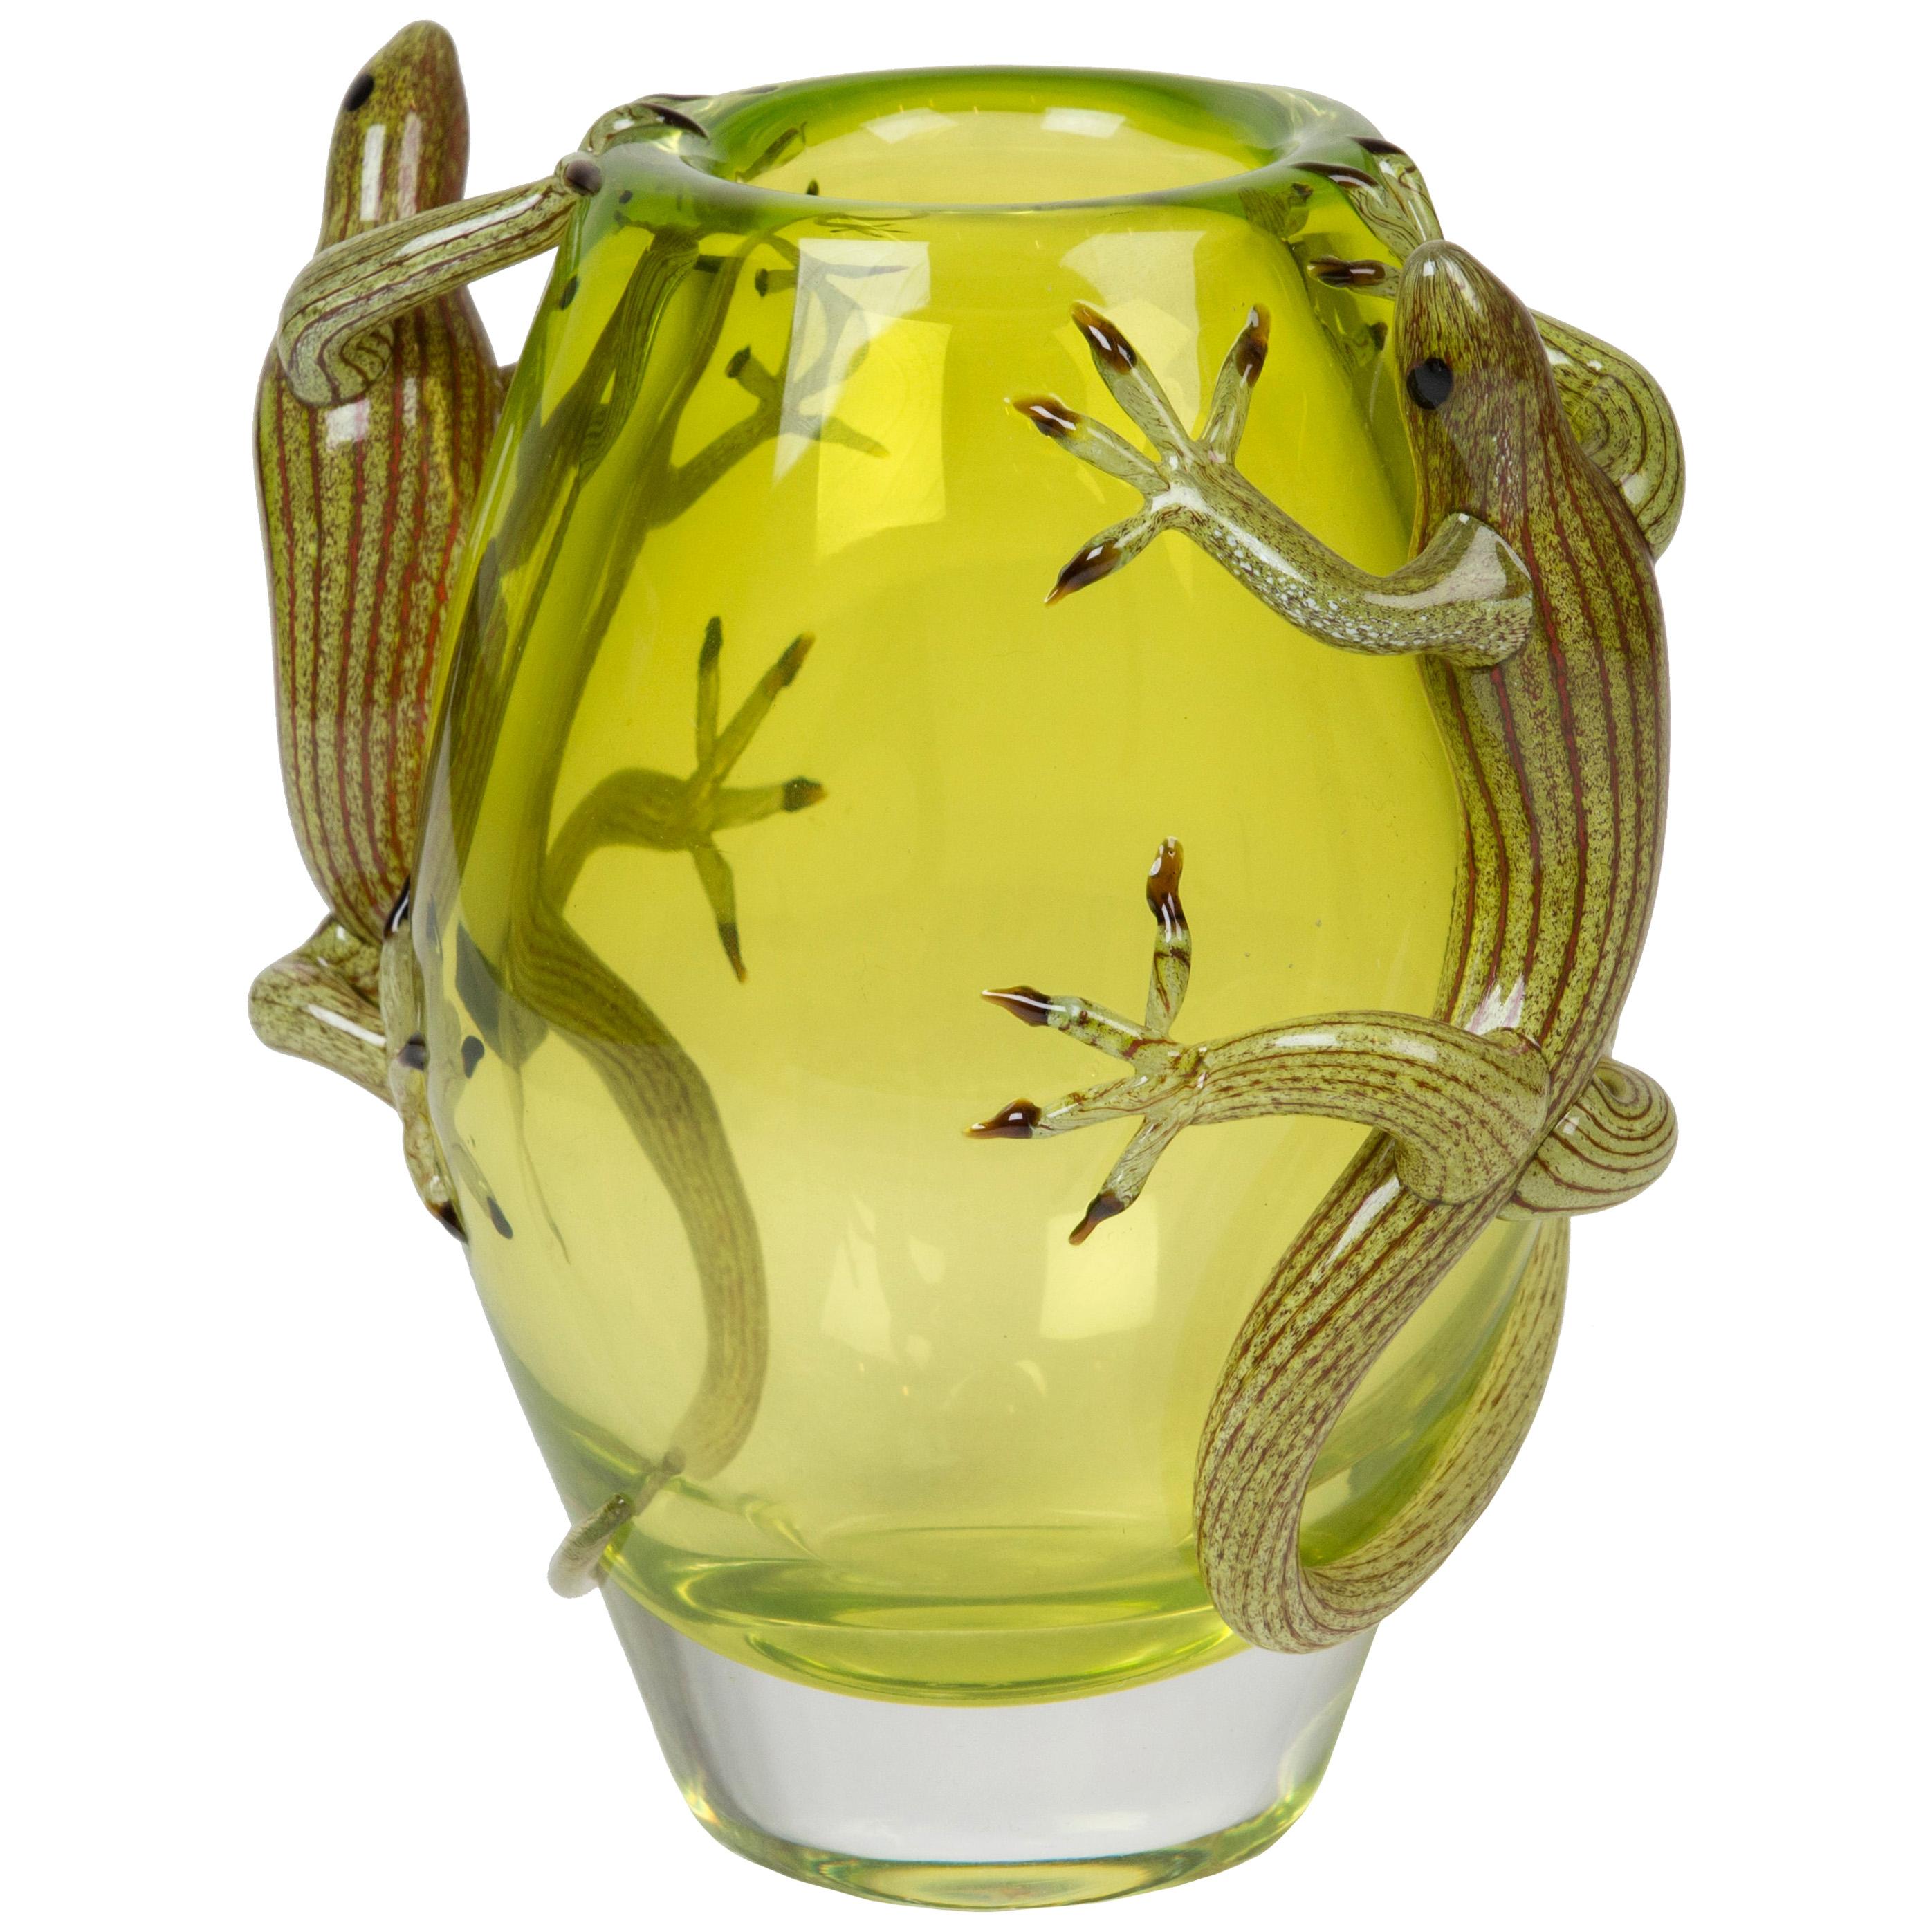 Geko Vase Small, Small Vase in Glass with 2 Gekos, Italy